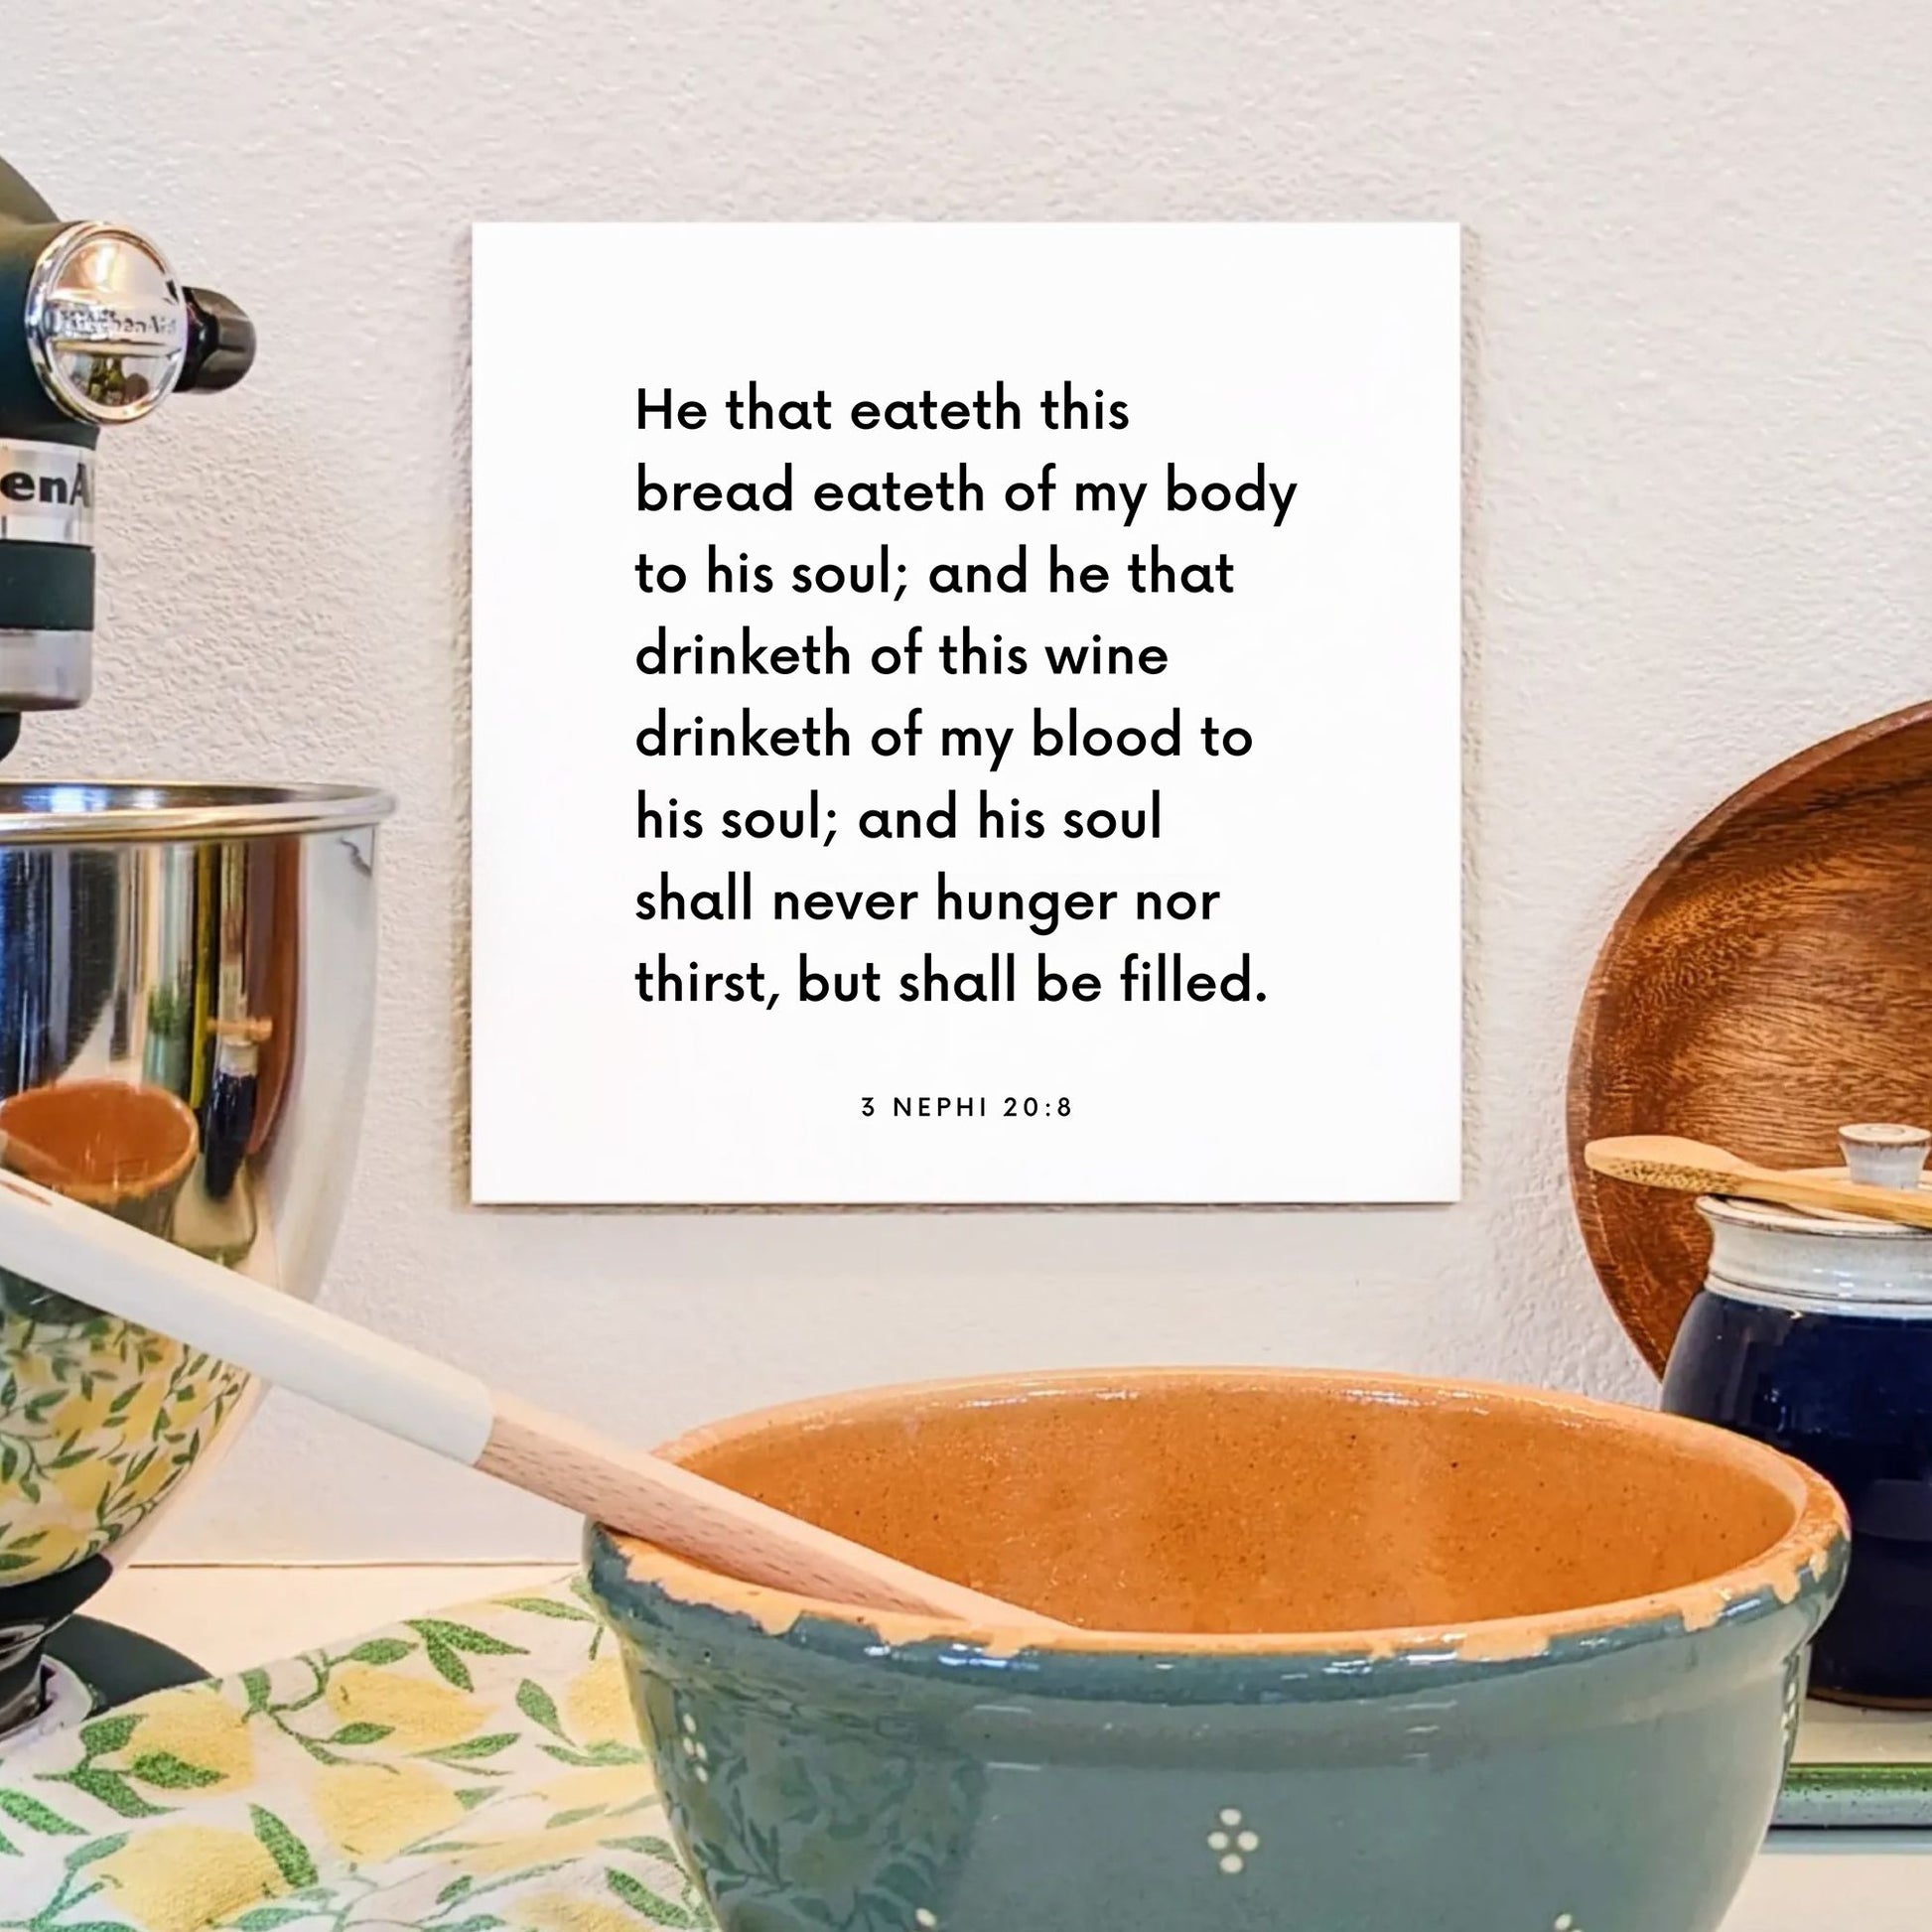 Kitchen mouting of the scripture tile for 3 Nephi 20:8 - "He that eateth this bread eateth of my body to his soul"